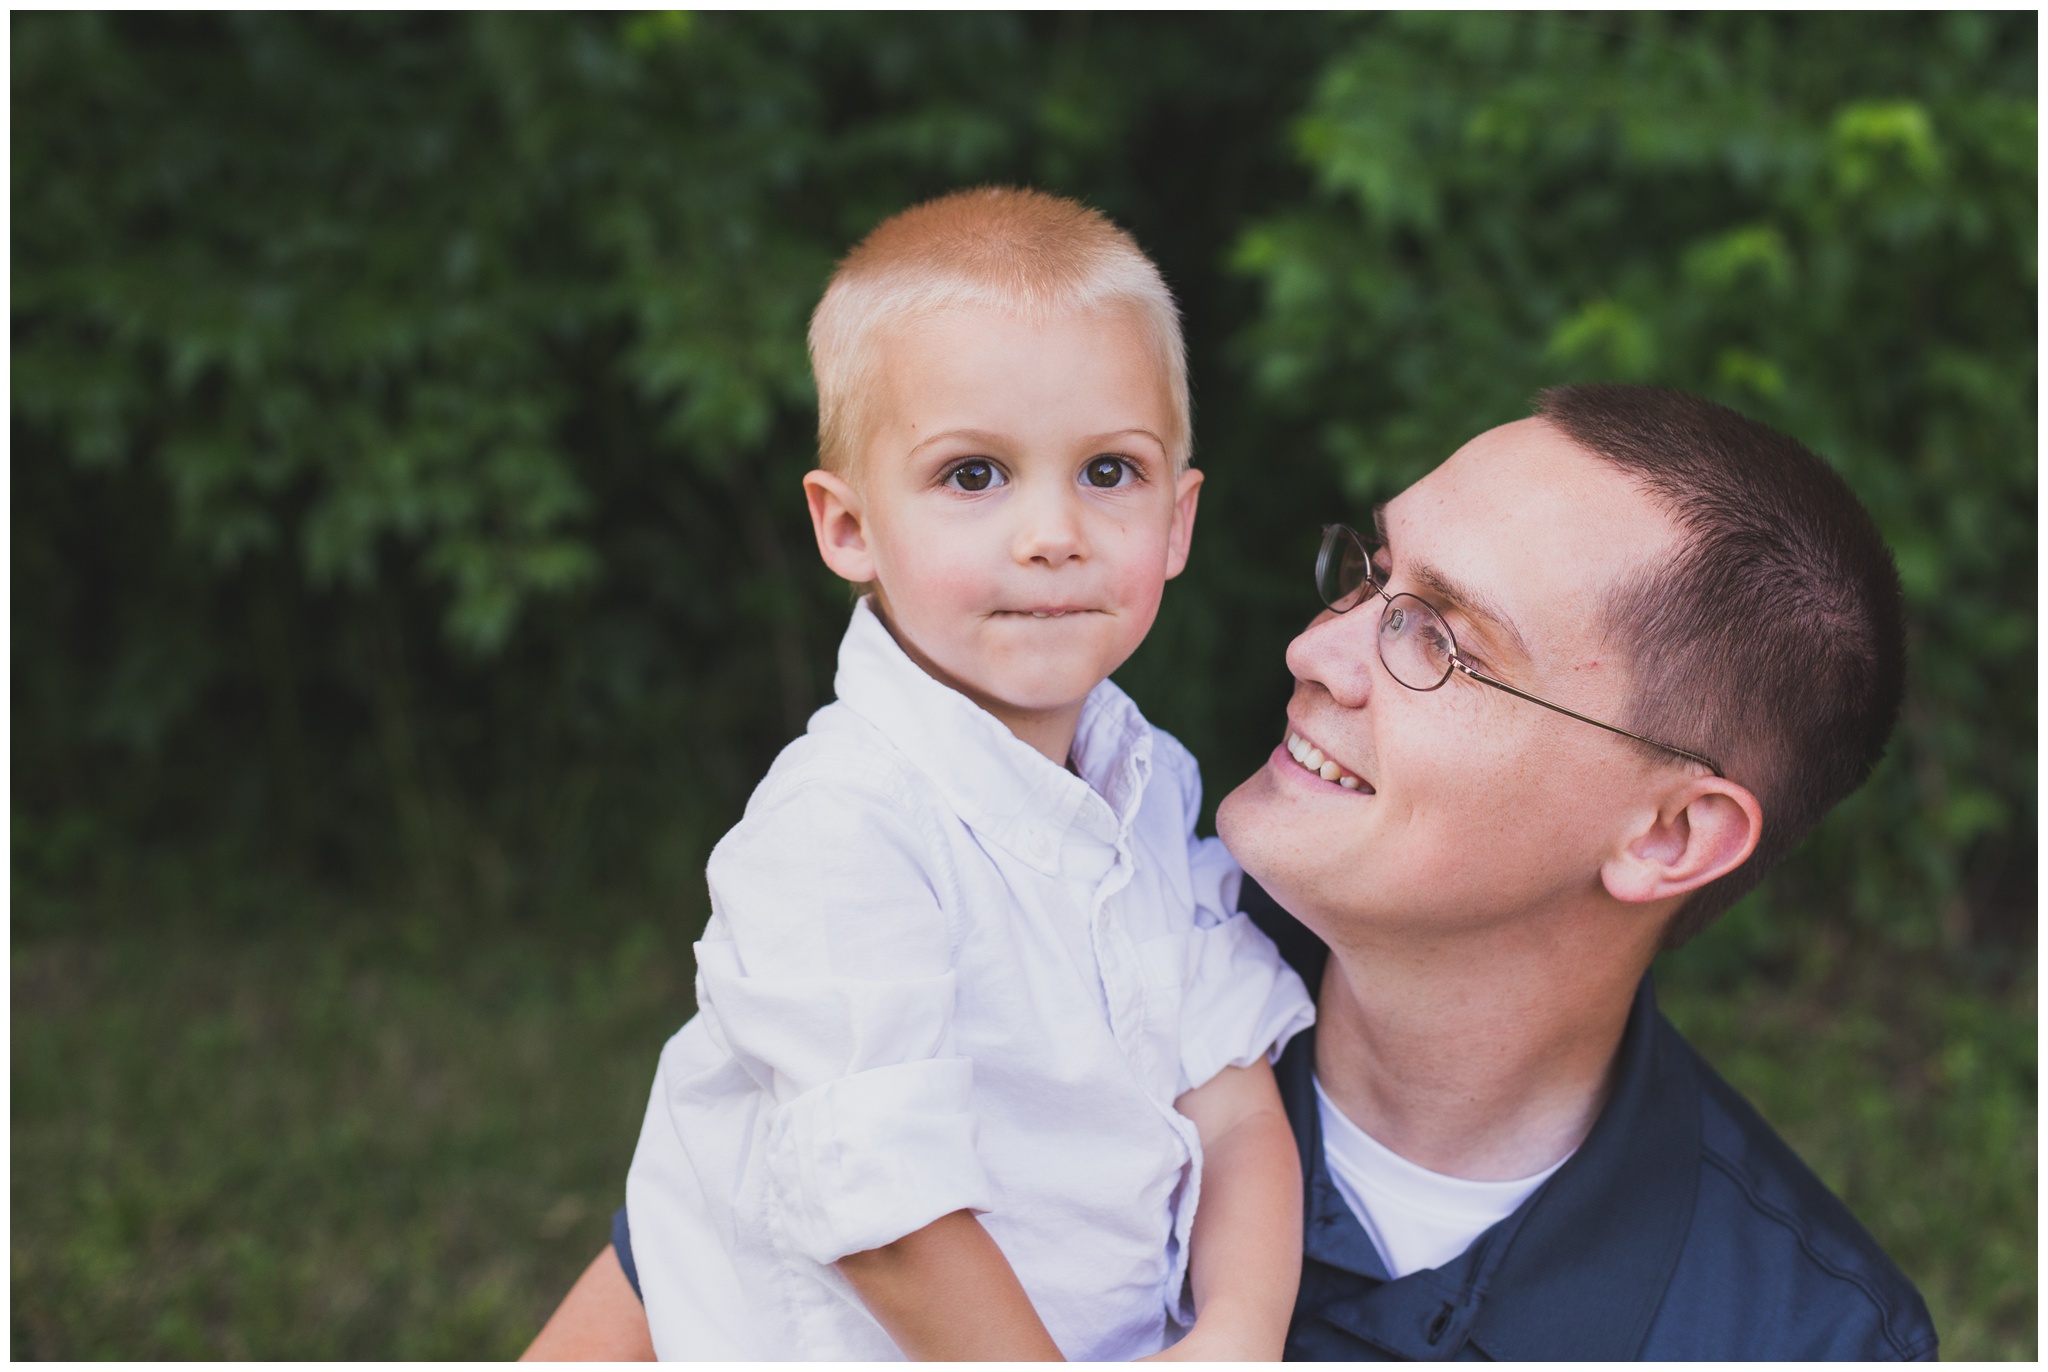 Potters Bridge Park family session in Noblesville, Indiana